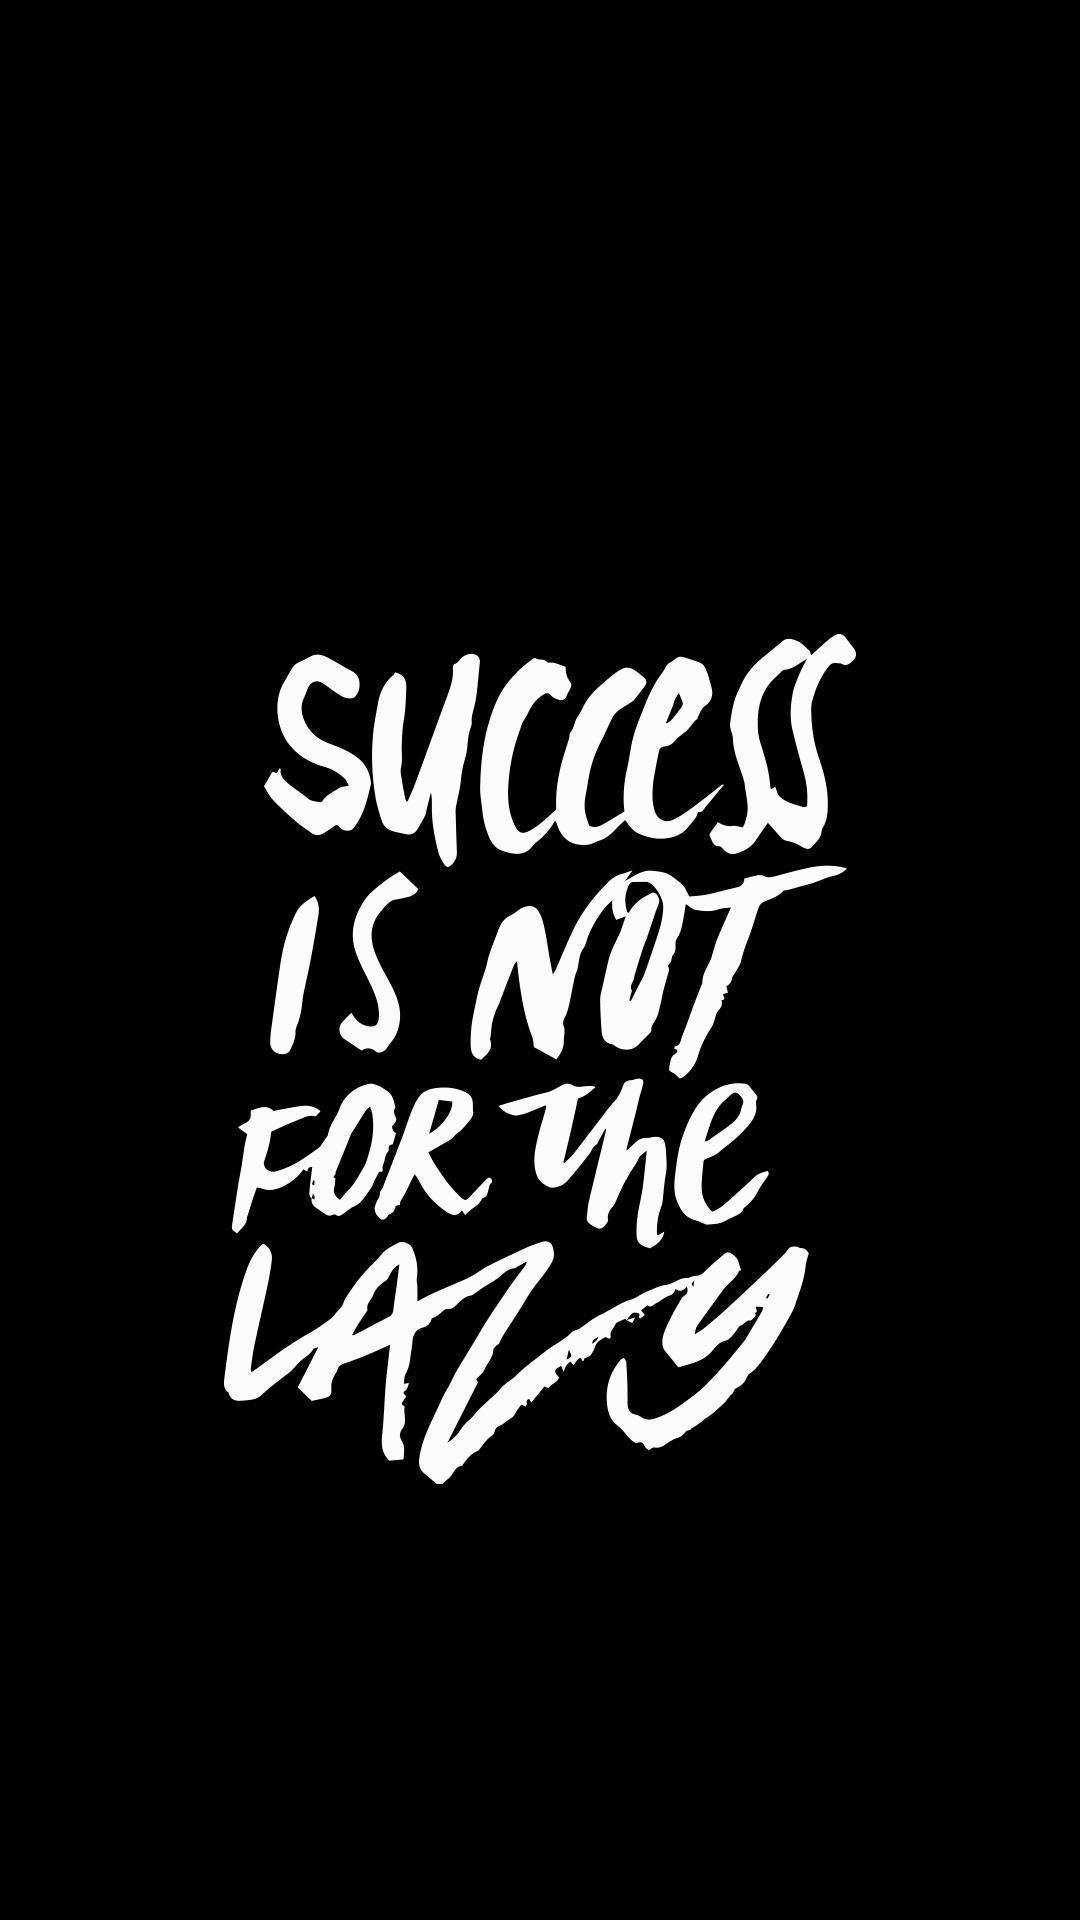 Success is not for the lazy